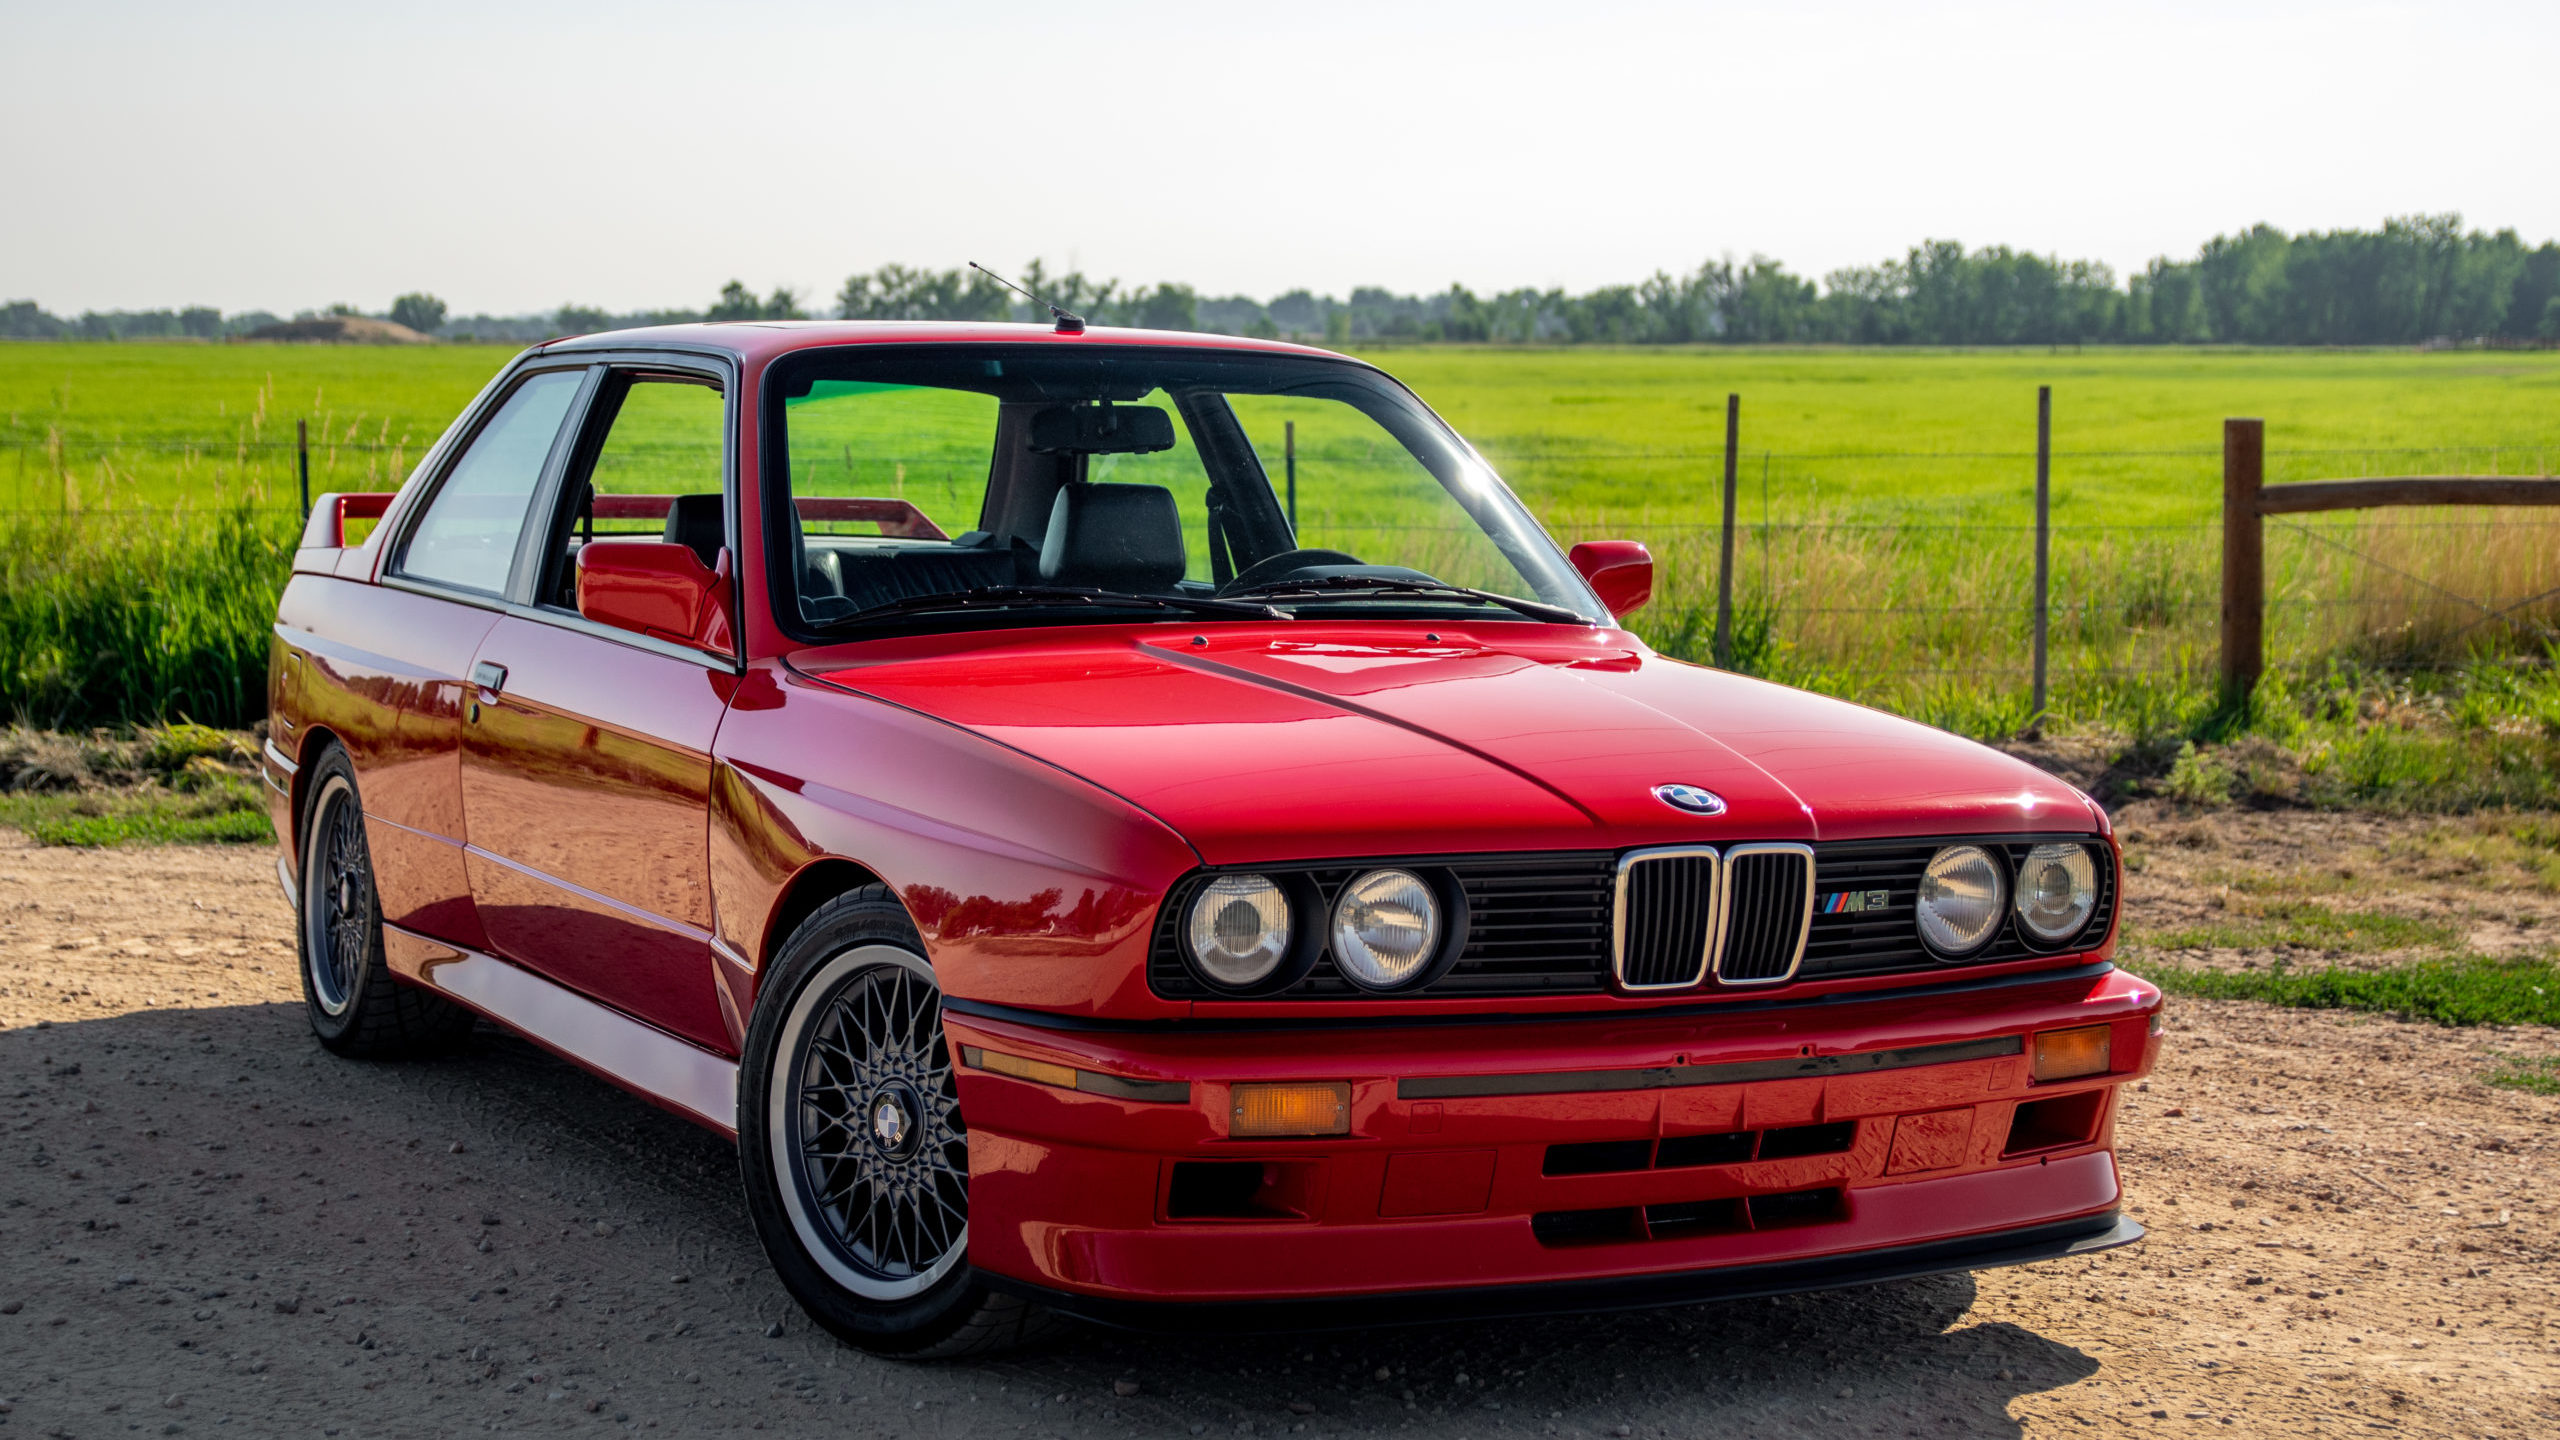 Too Short A Time With The Perfect 0 M3 Bimmerlife